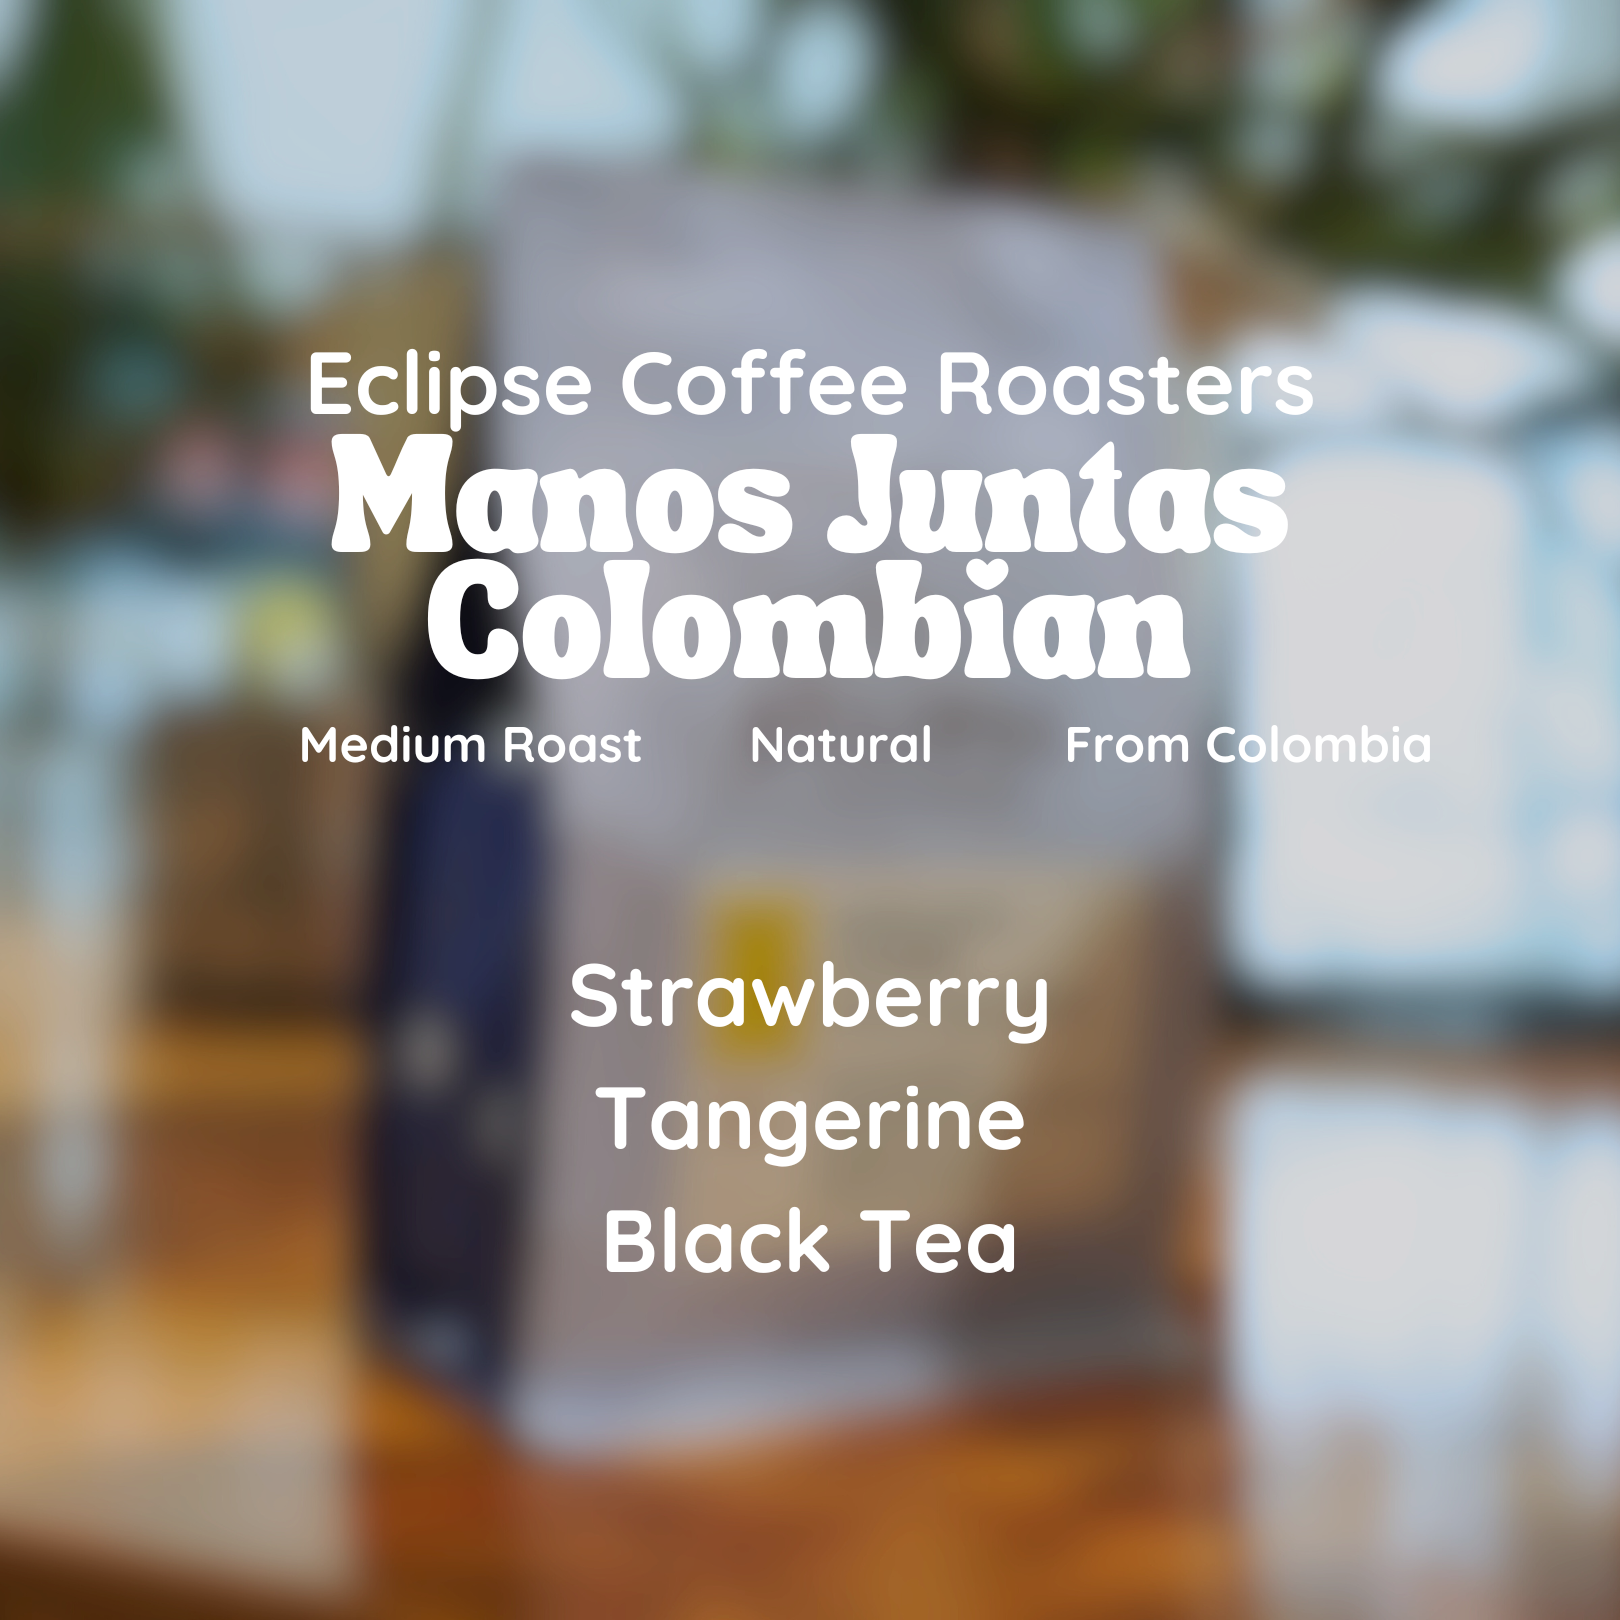 Eclipse Coffee Roasters Manos Juntas Micromill Colombia Coffee Beans